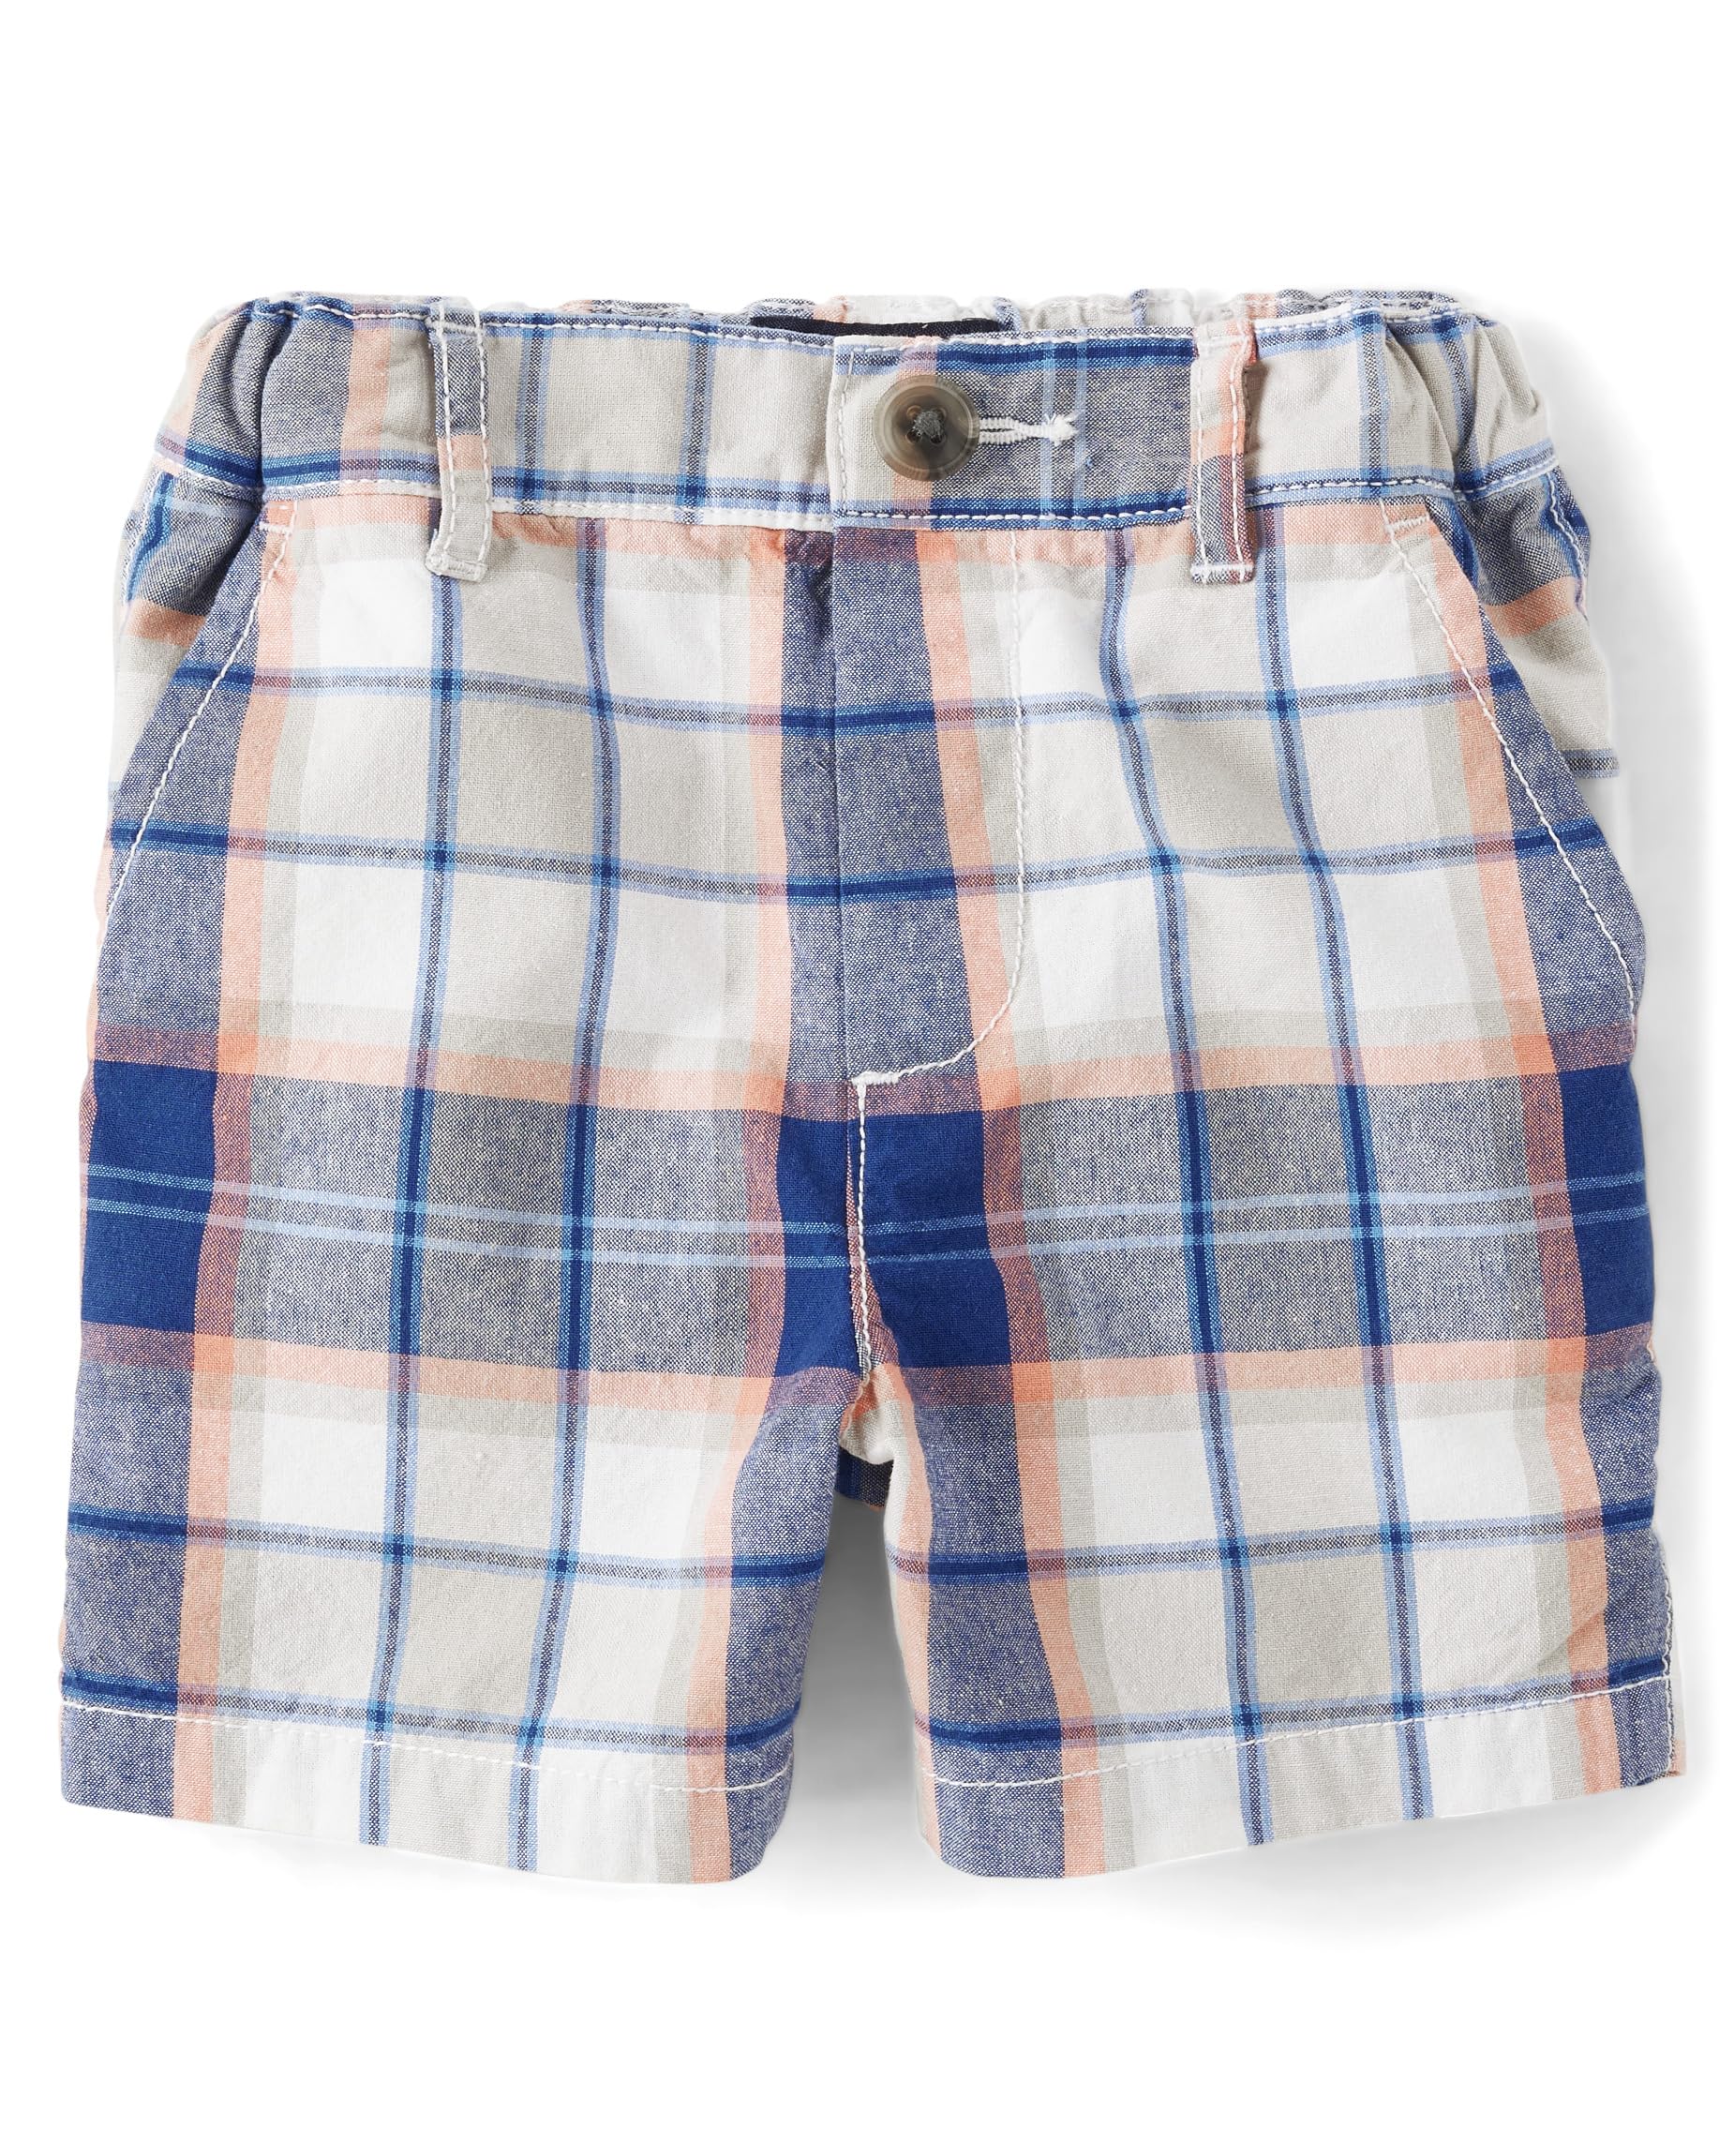 The Children's Place Boys' and Toddler Patterned Chino Shorts